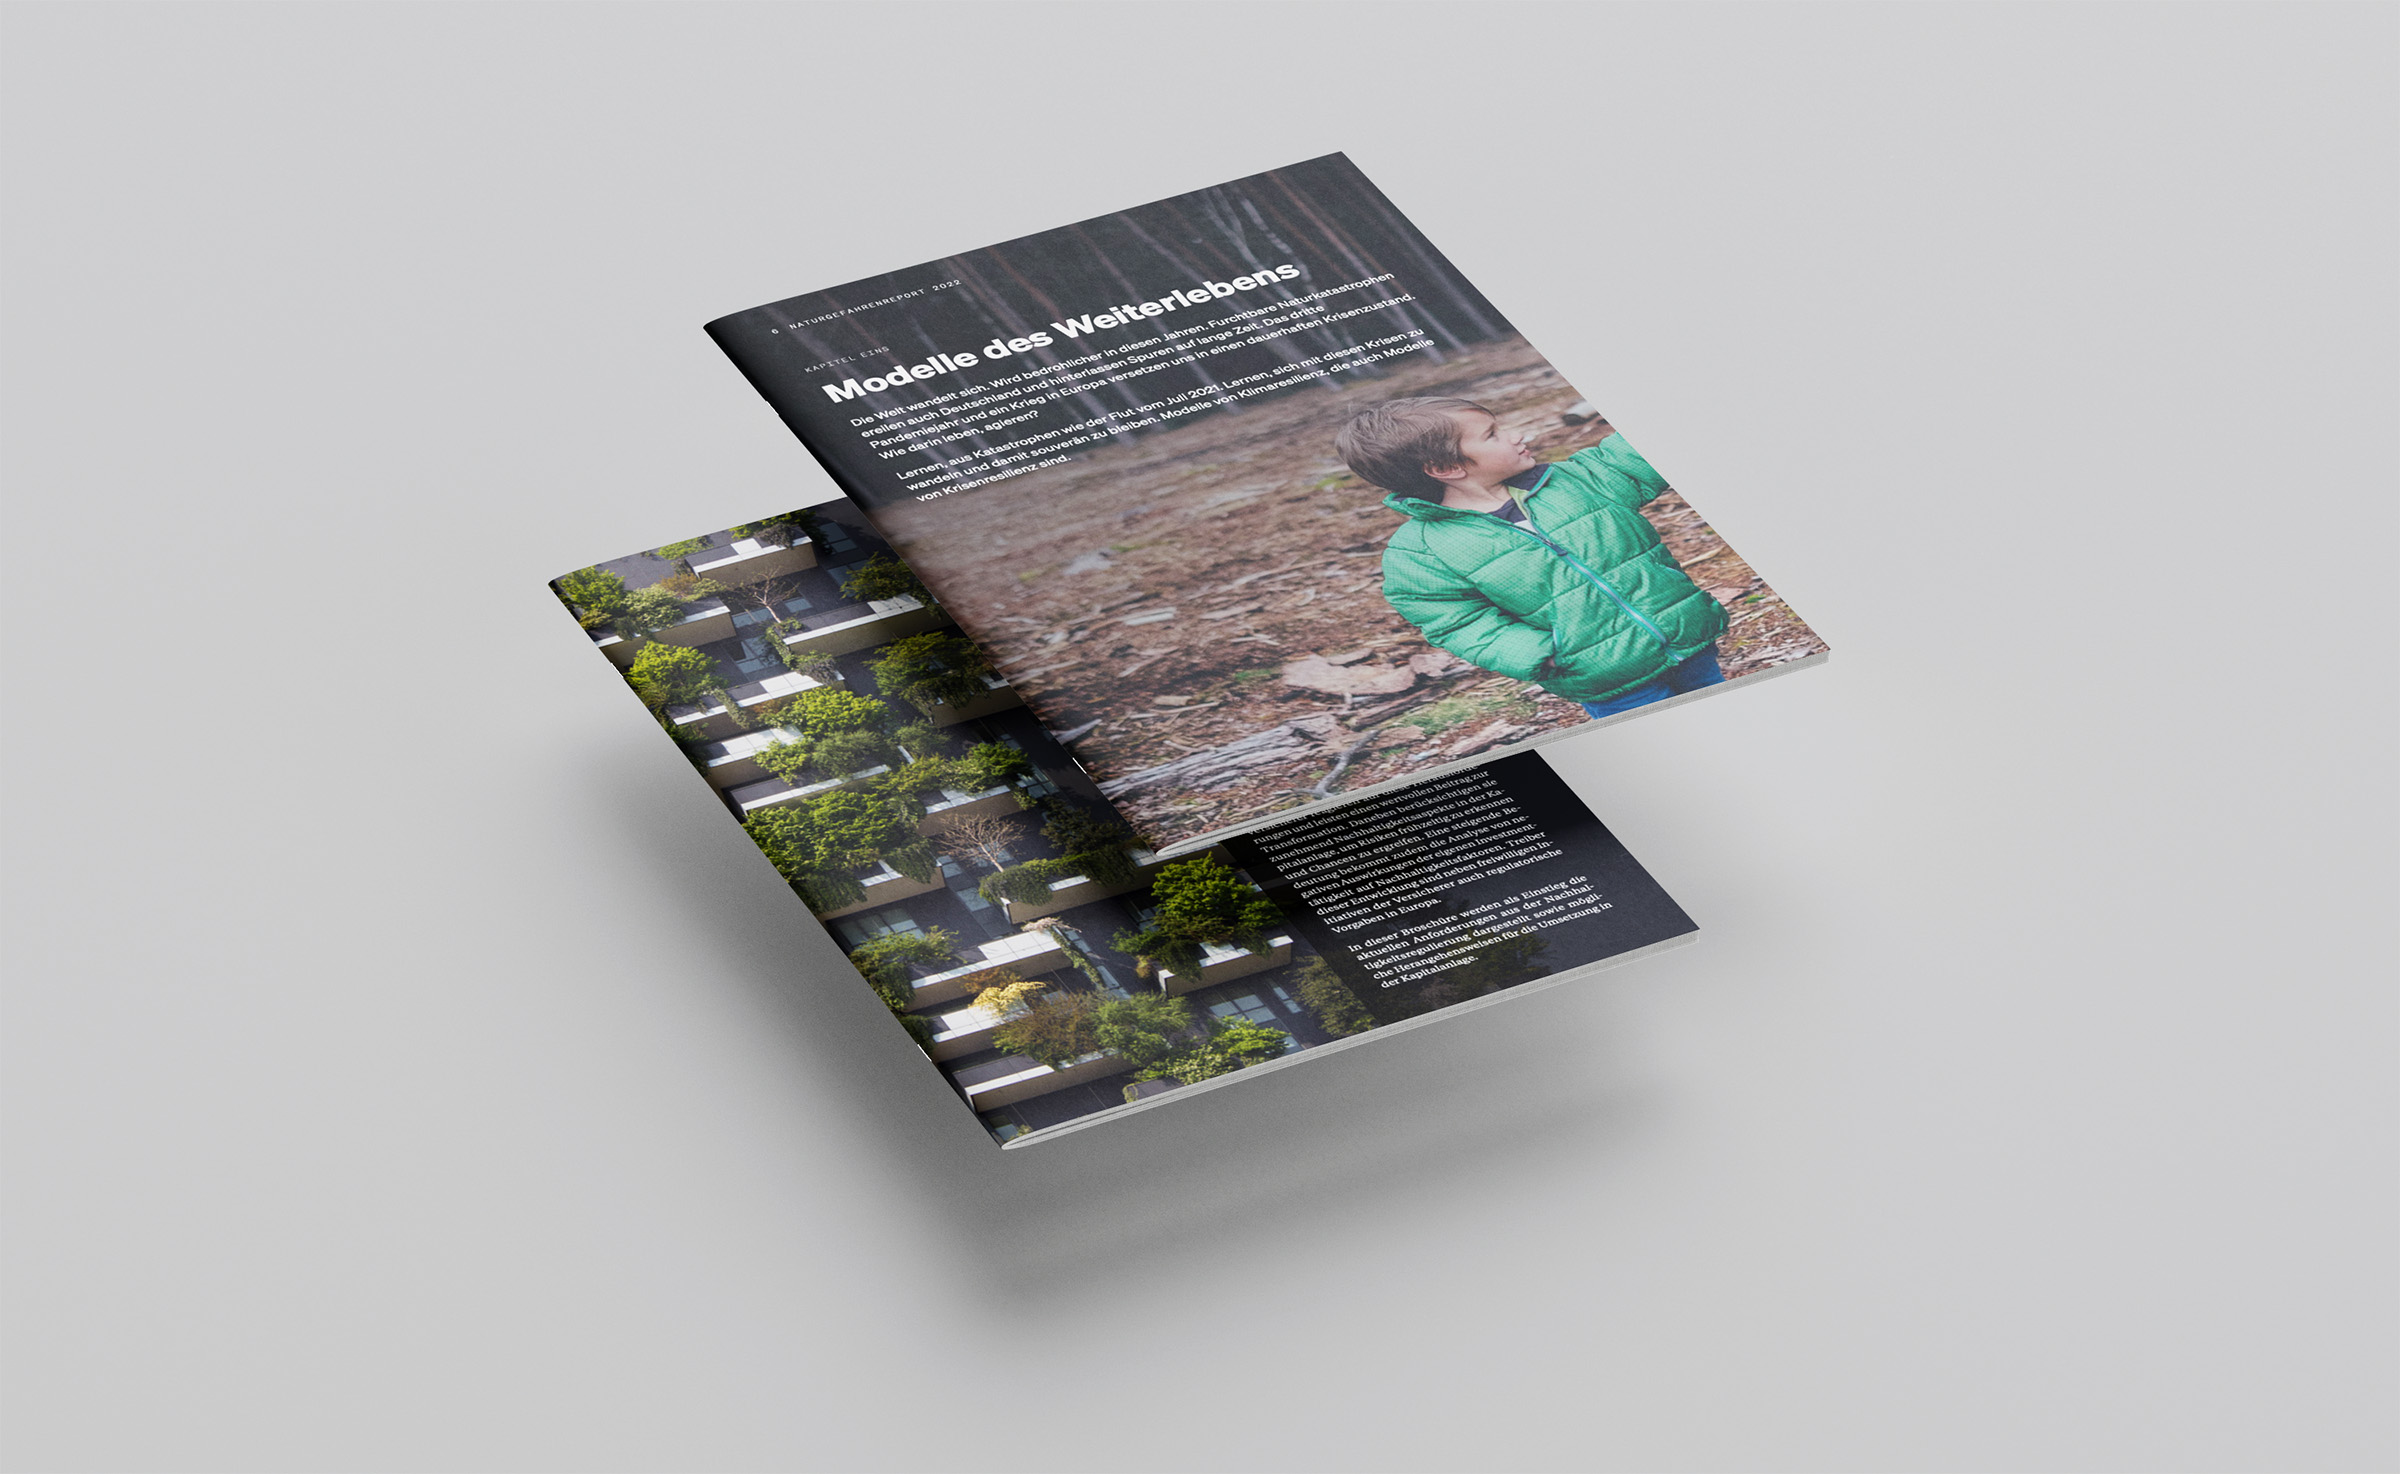 Two brochures hovering over a grey surface. The front pages show images and text. One brochure has a picture of a boy in a green jacket as the cover motif. The other brochure's cover is an image of the Bosco Verticale in Milan.